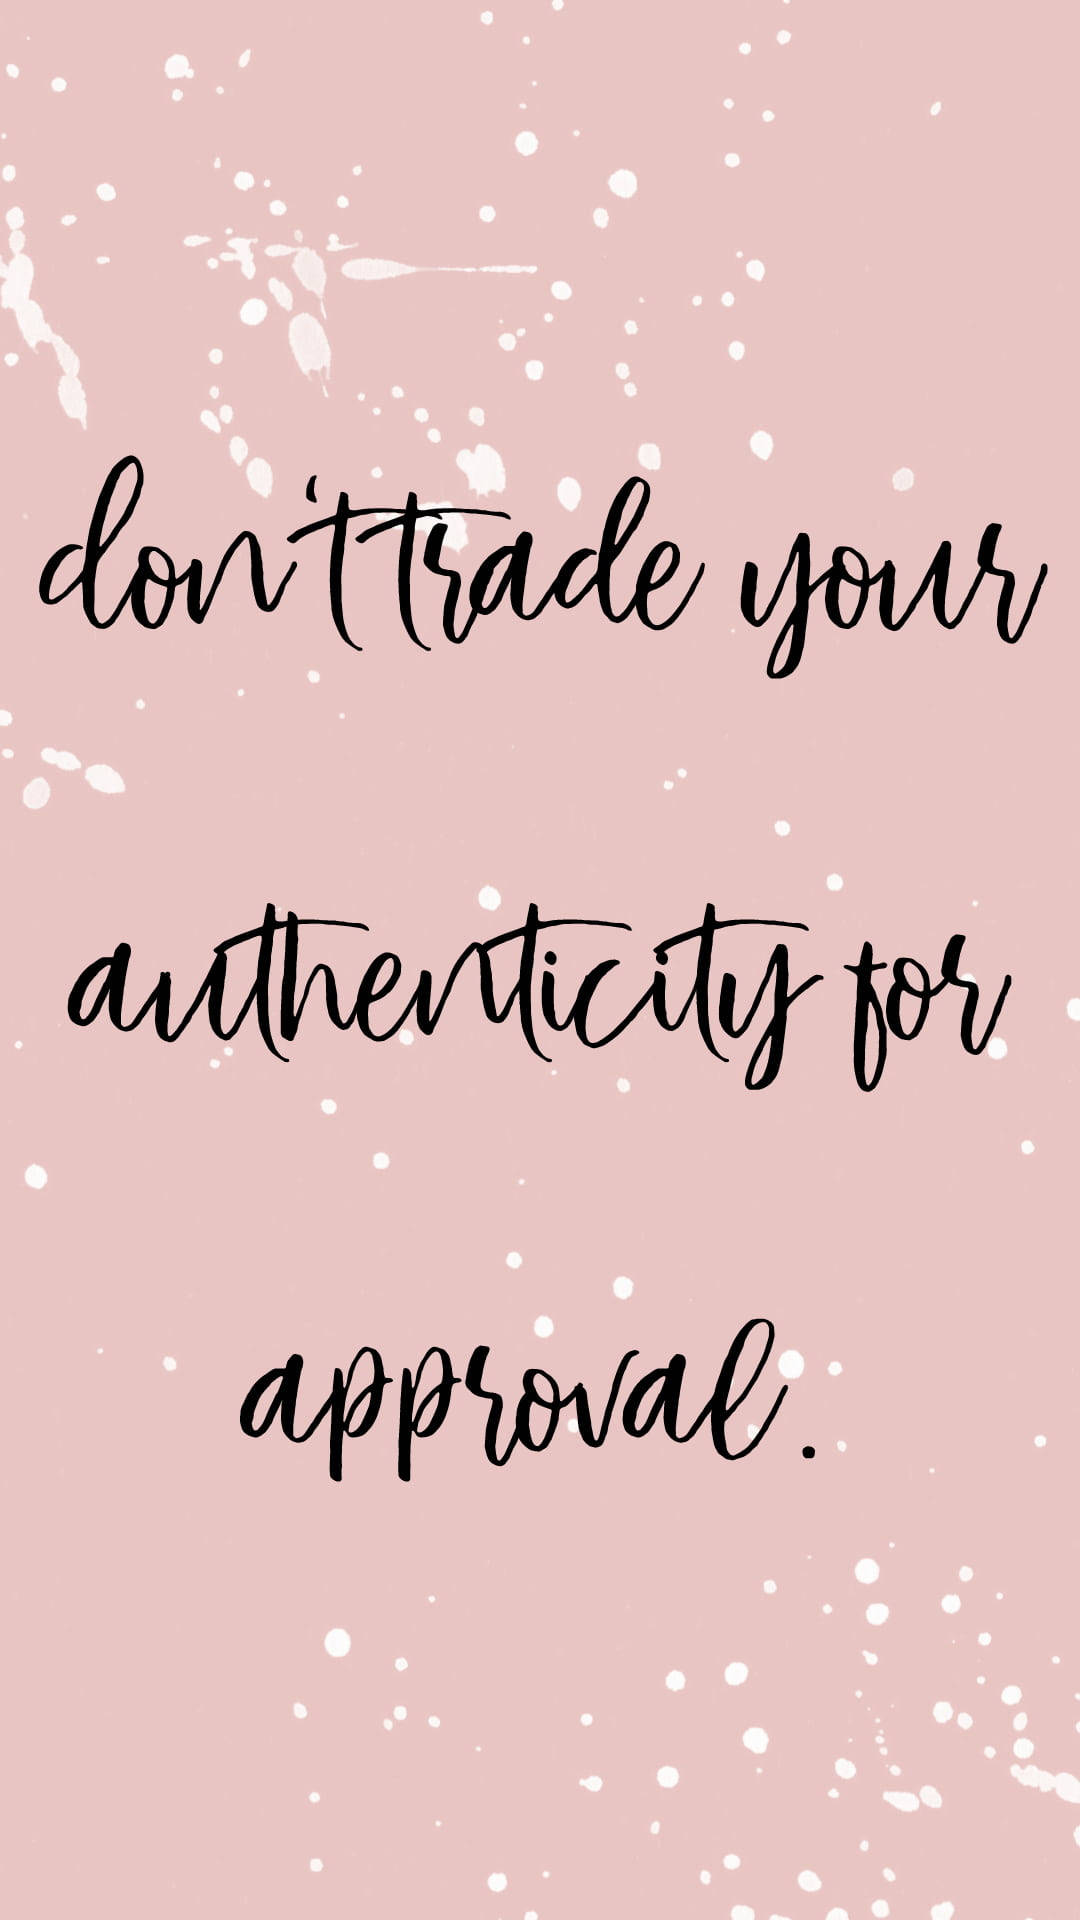 Authentic Approval Quote Wallpaper